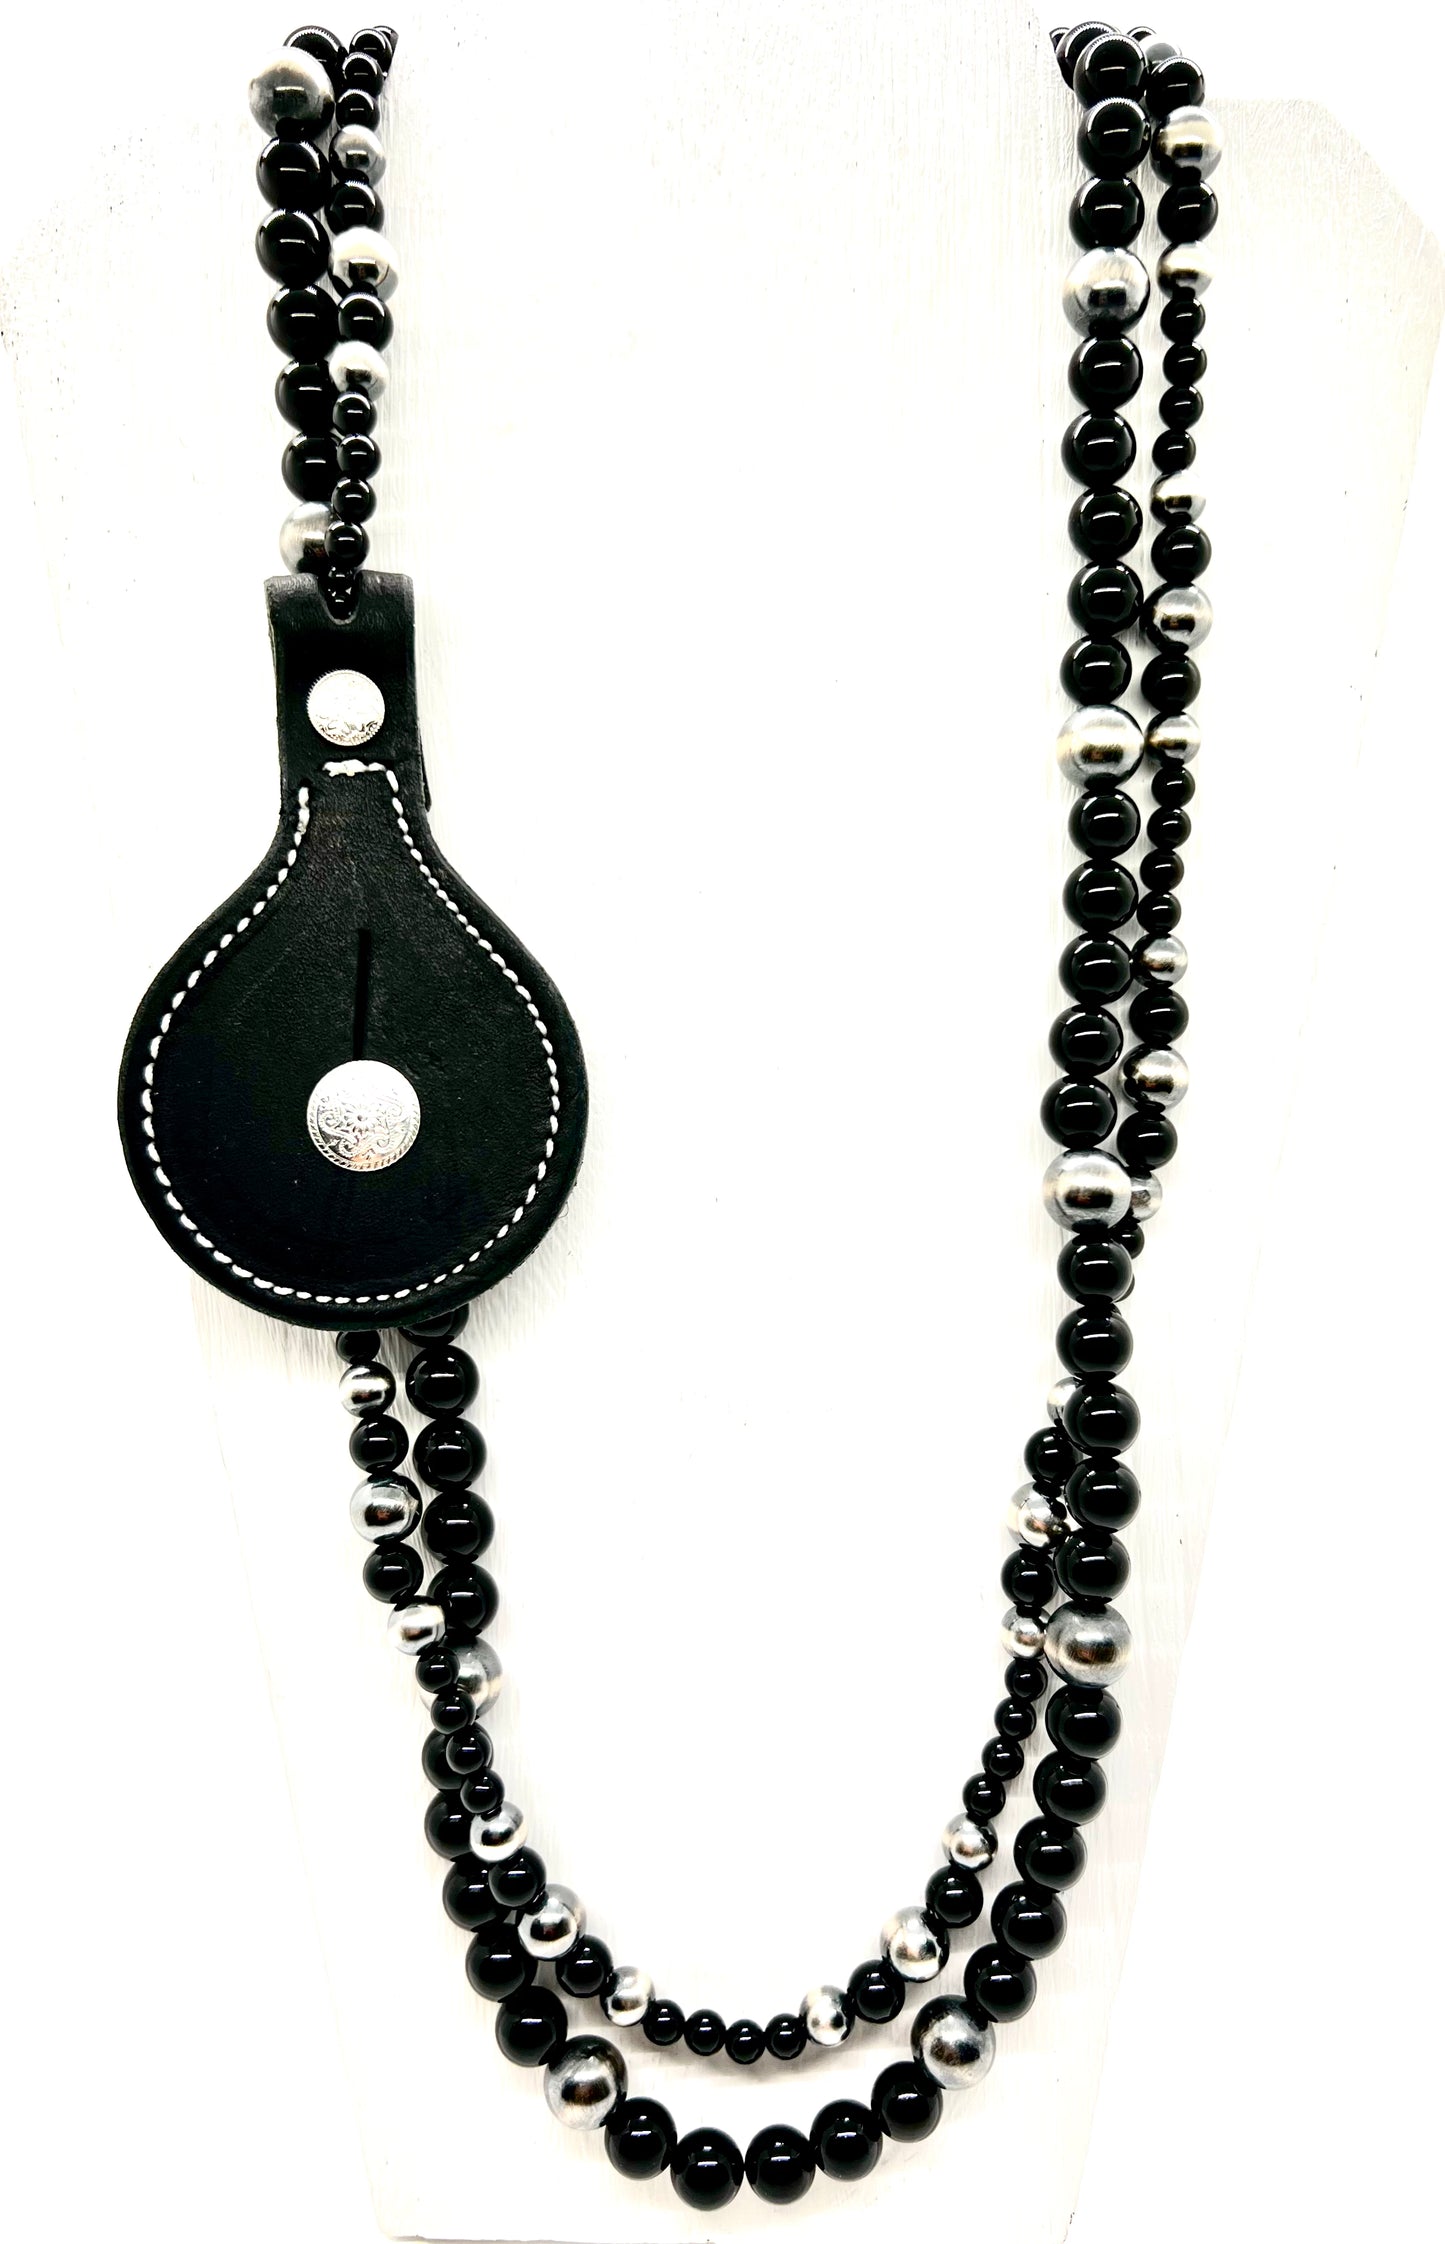 Spur Strap Necklace with Onyx and Navajo Pearls